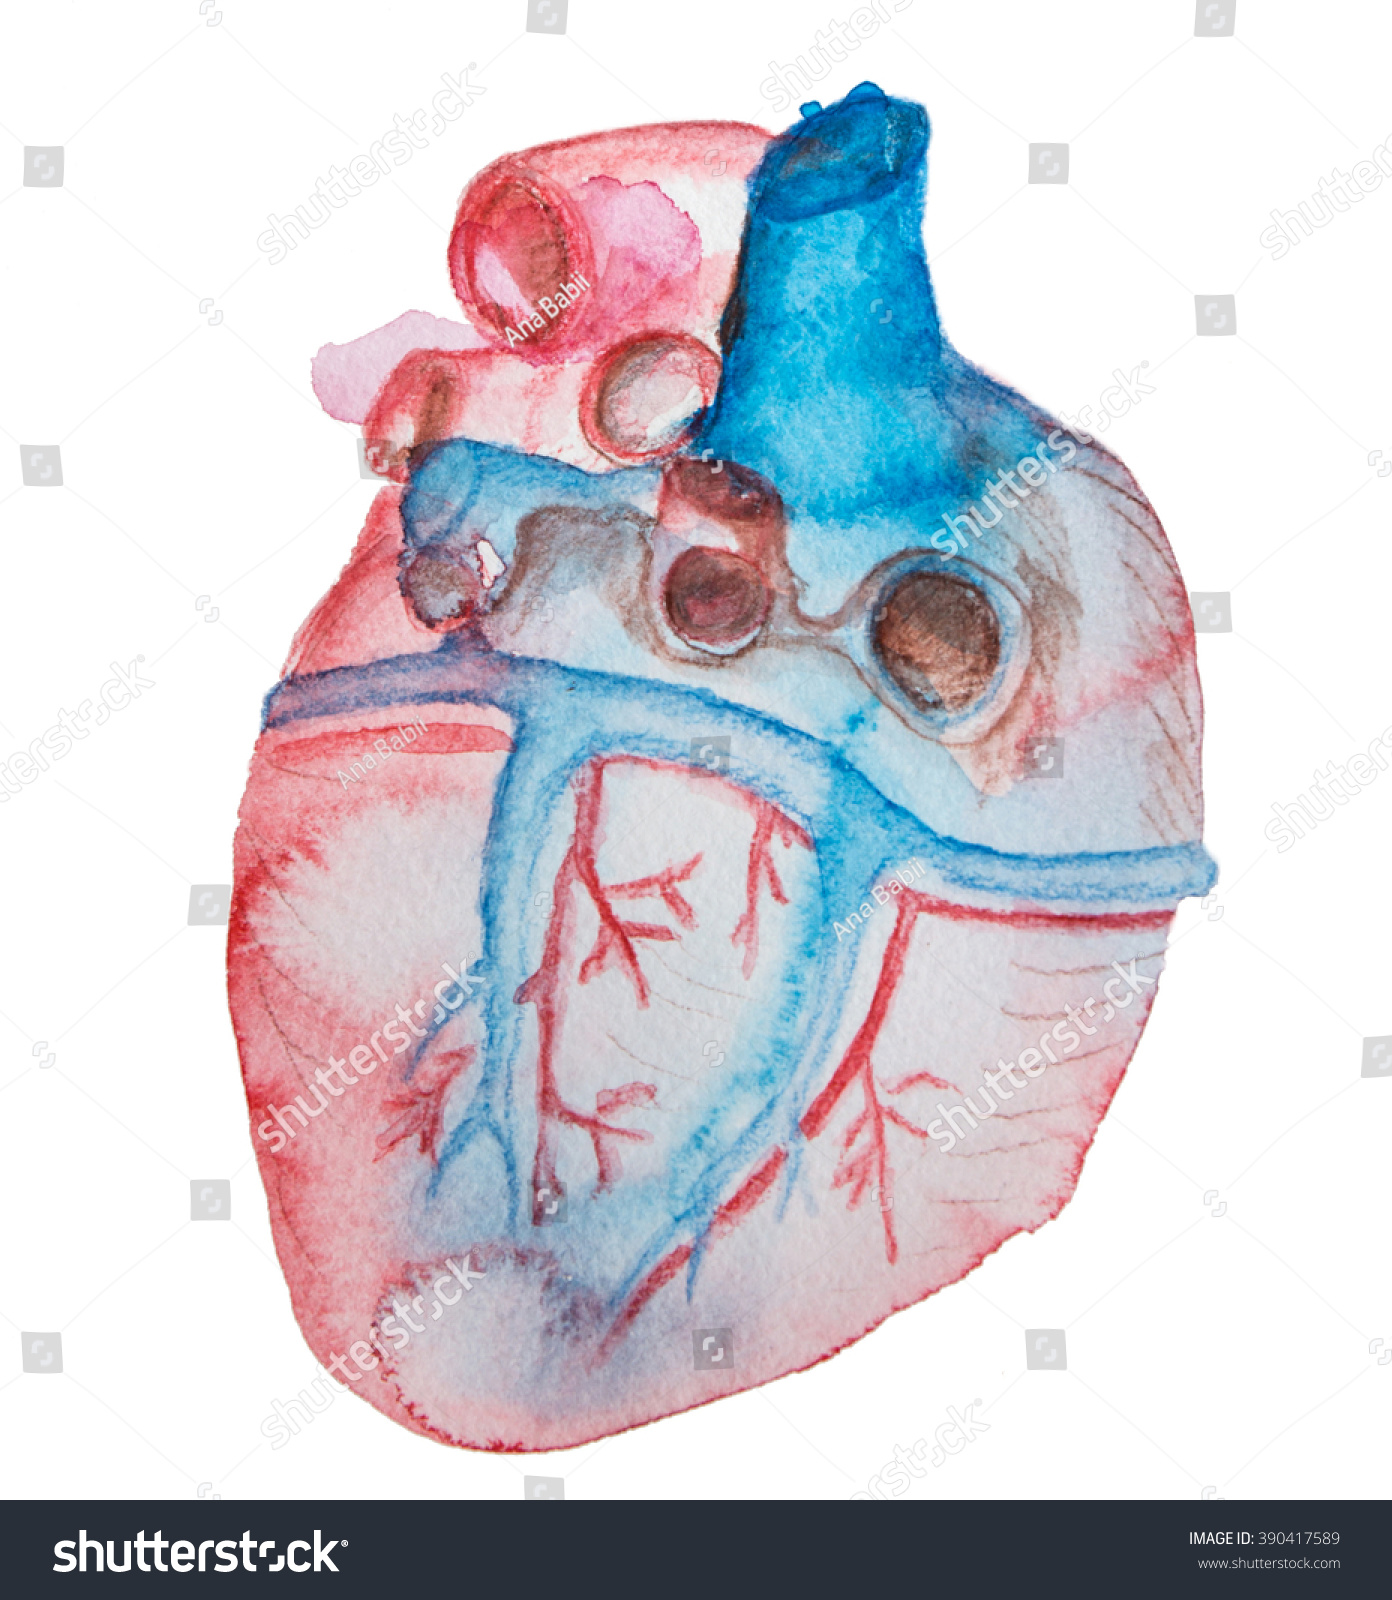 Watercolor Drawing Realistic Heart Stock Illustration